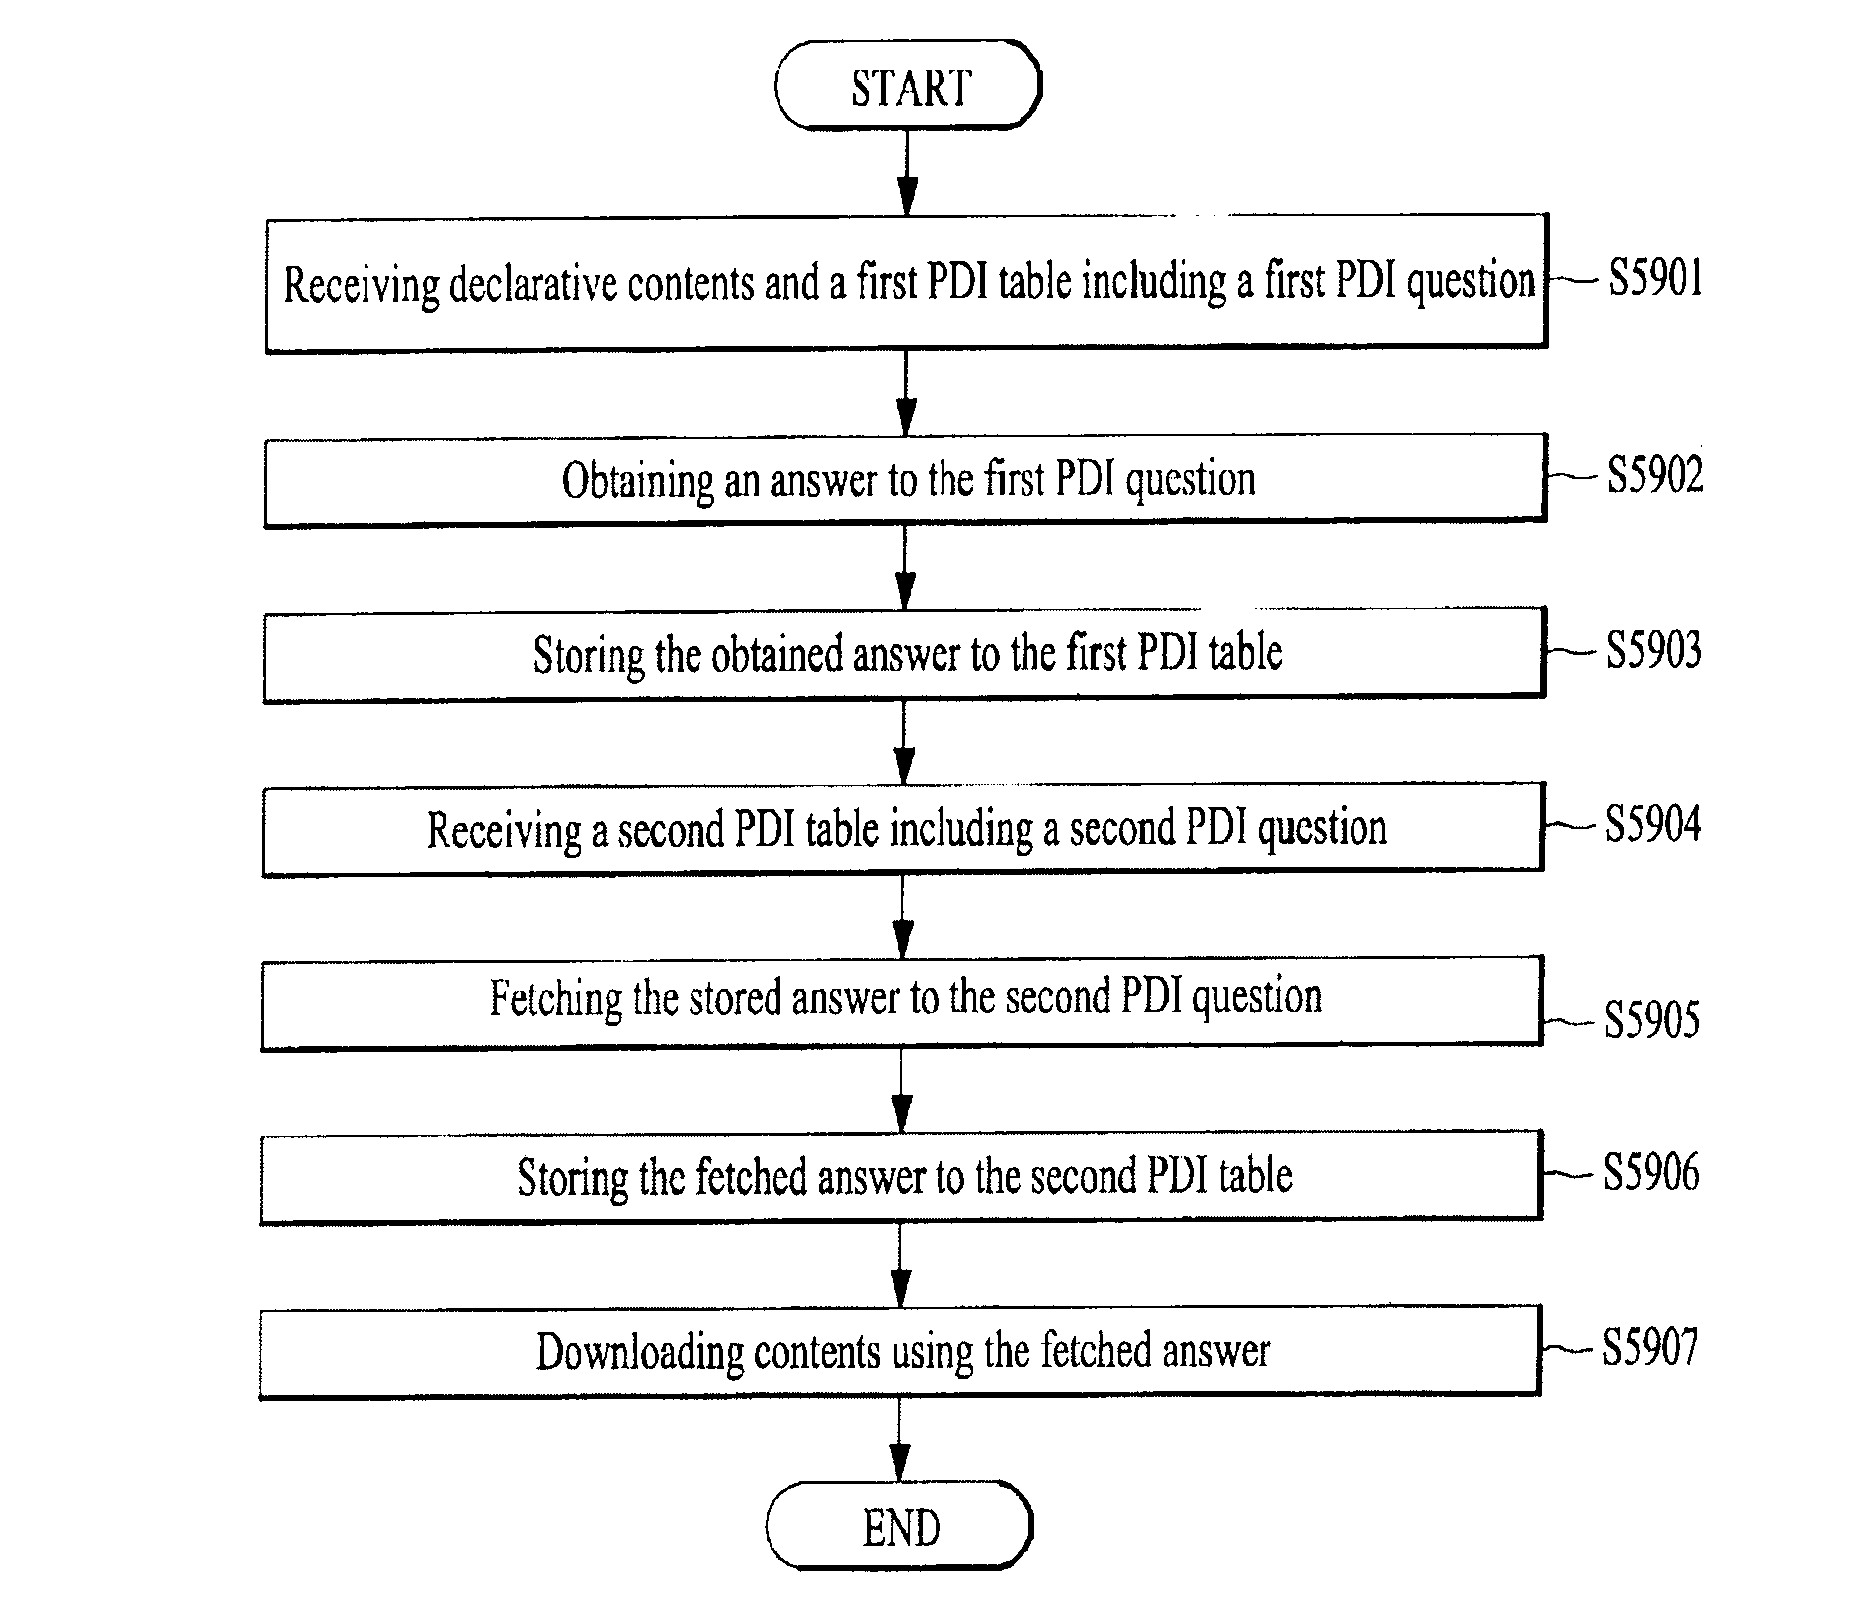 Method and apparatus for processing digital service signal